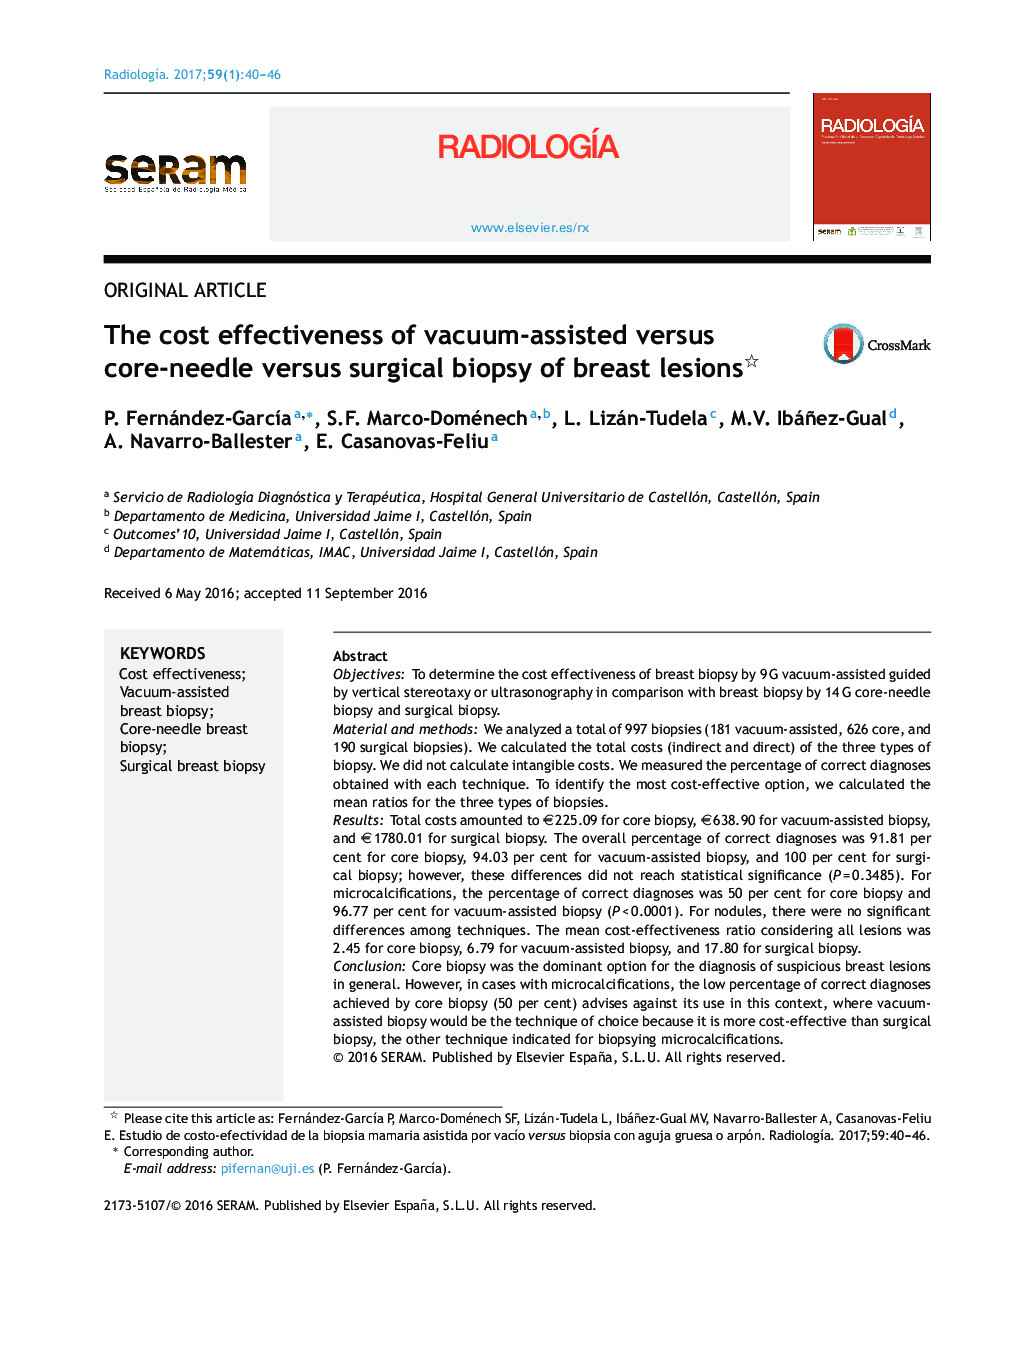 The cost effectiveness of vacuum-assisted versus core-needle versus surgical biopsy of breast lesions